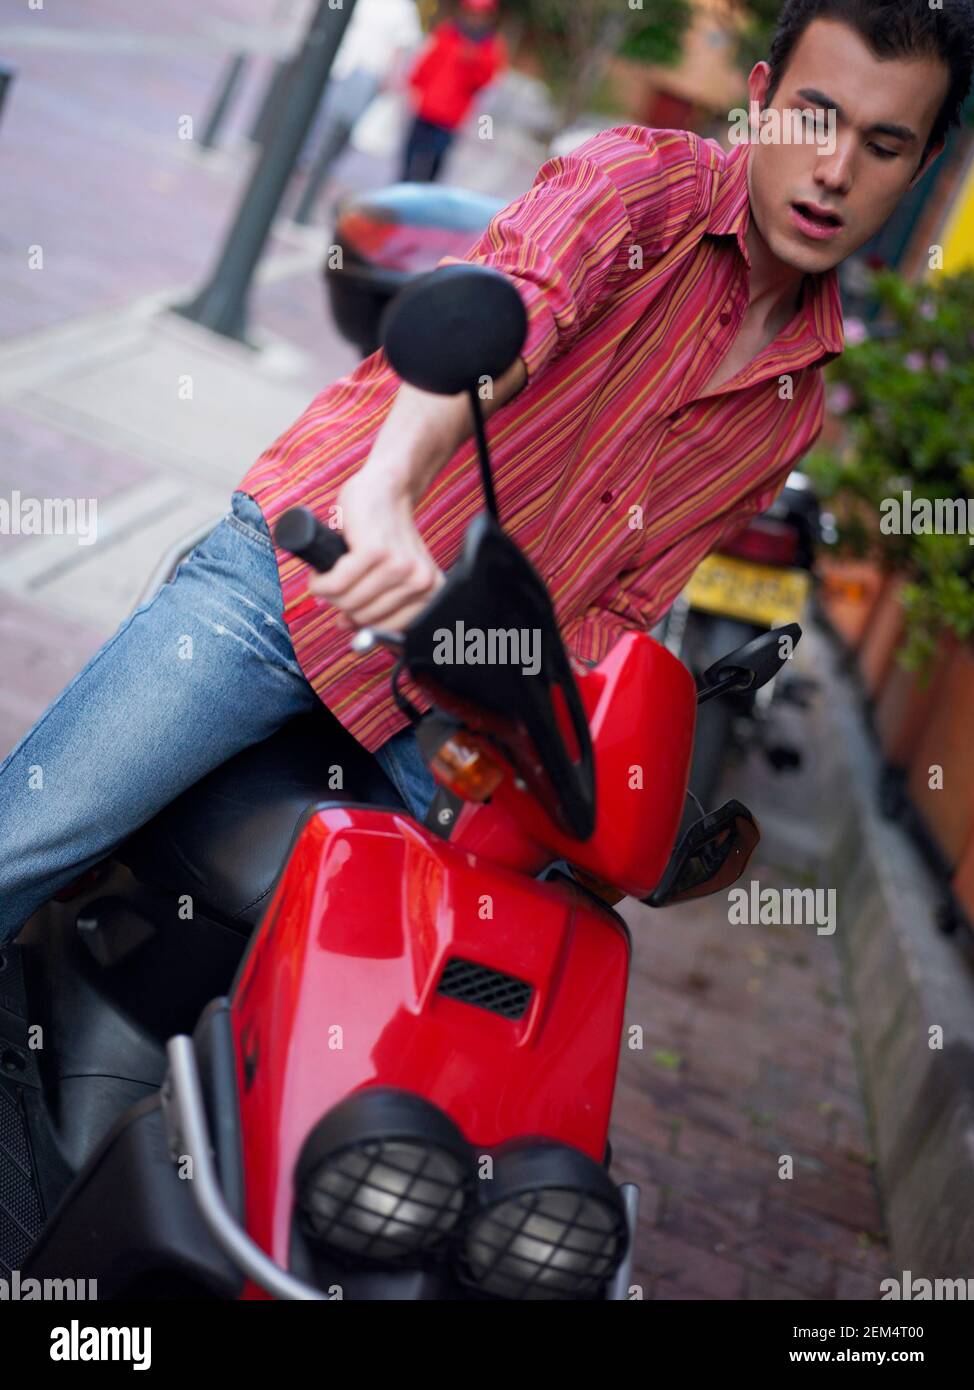 Close-up of a young man riding a motor scooter Stock Photo